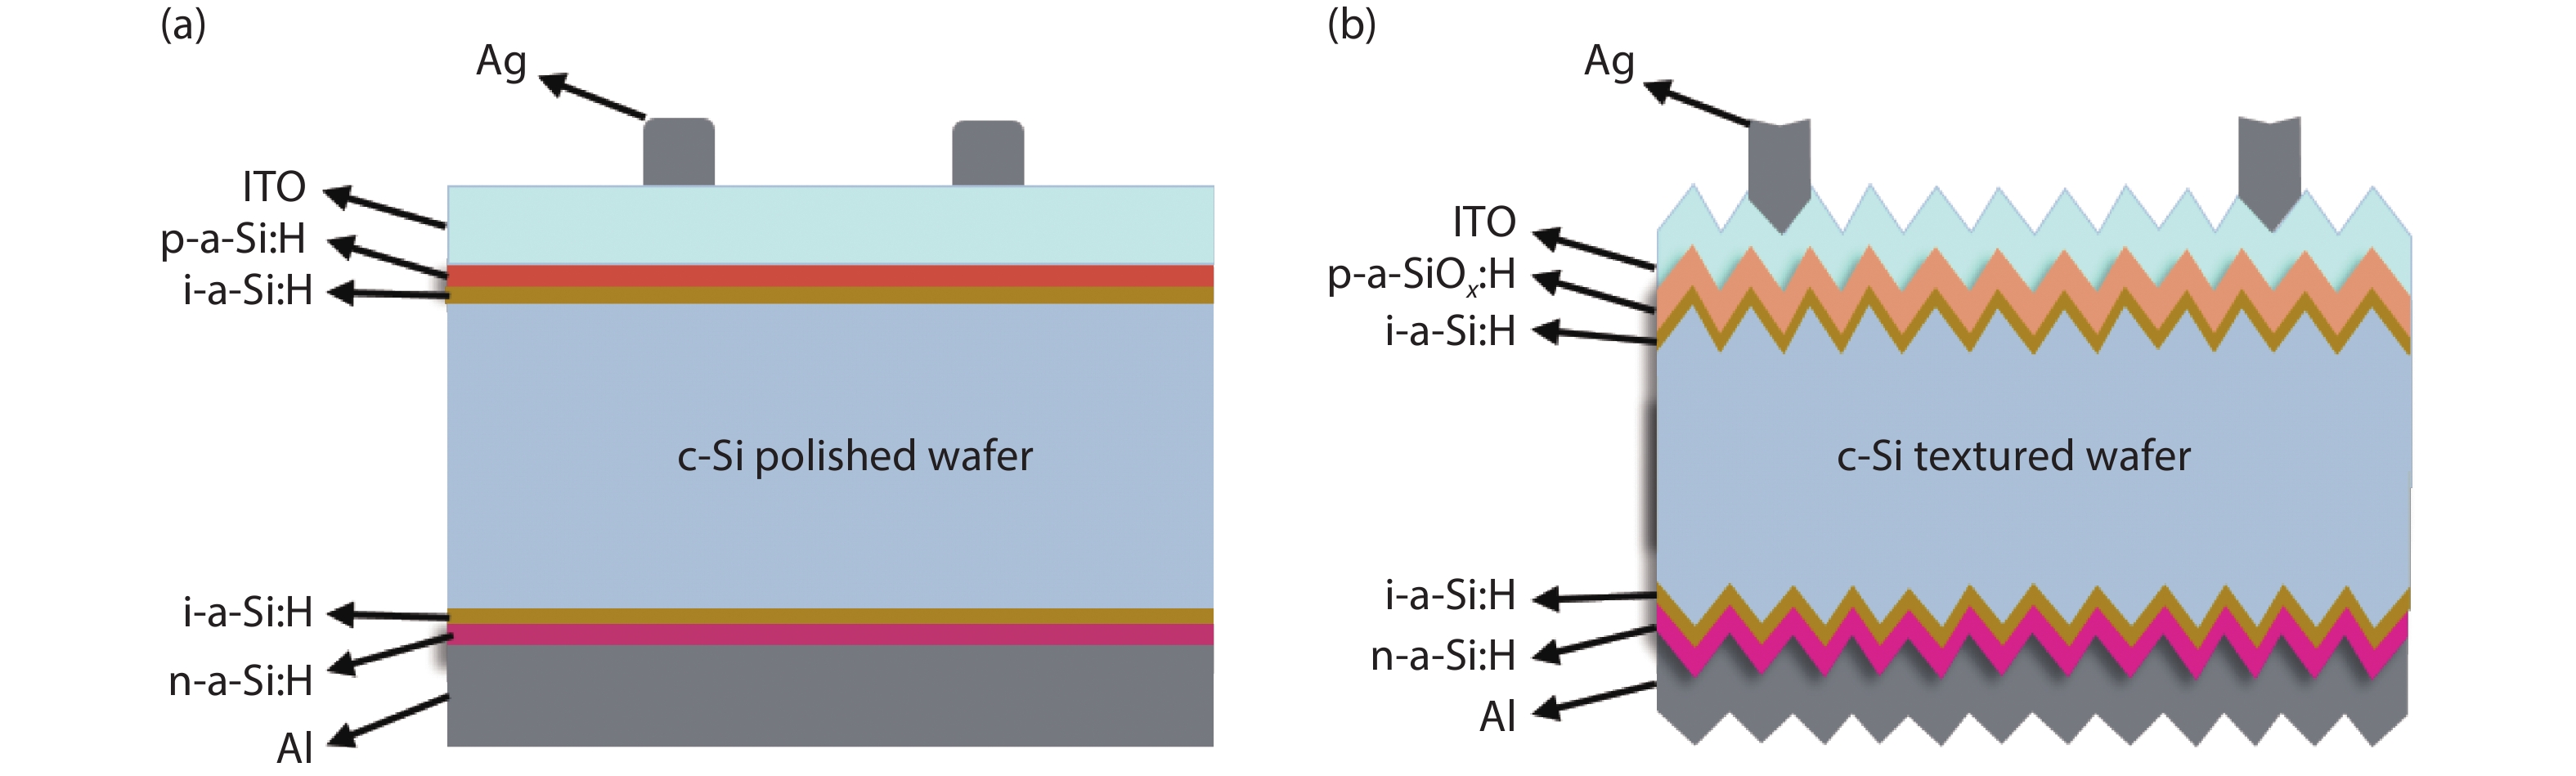 (Color online) Structures of (a) flat and (b) textured HIT solar cell in this study.